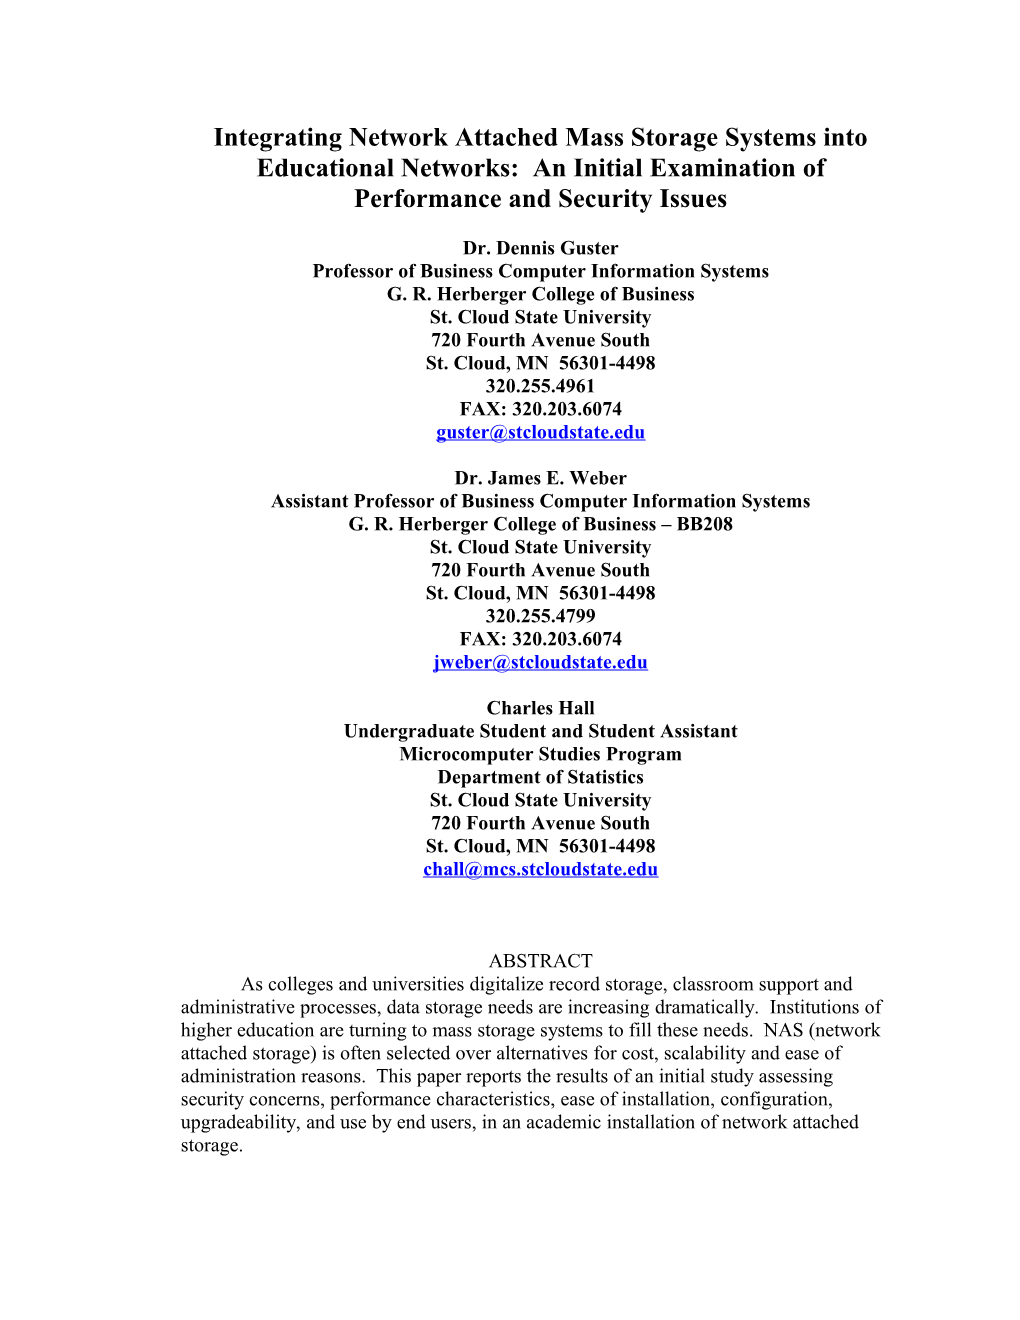 Integrating Network Attached Mass Storage Systems Into Educational Networks: Performance